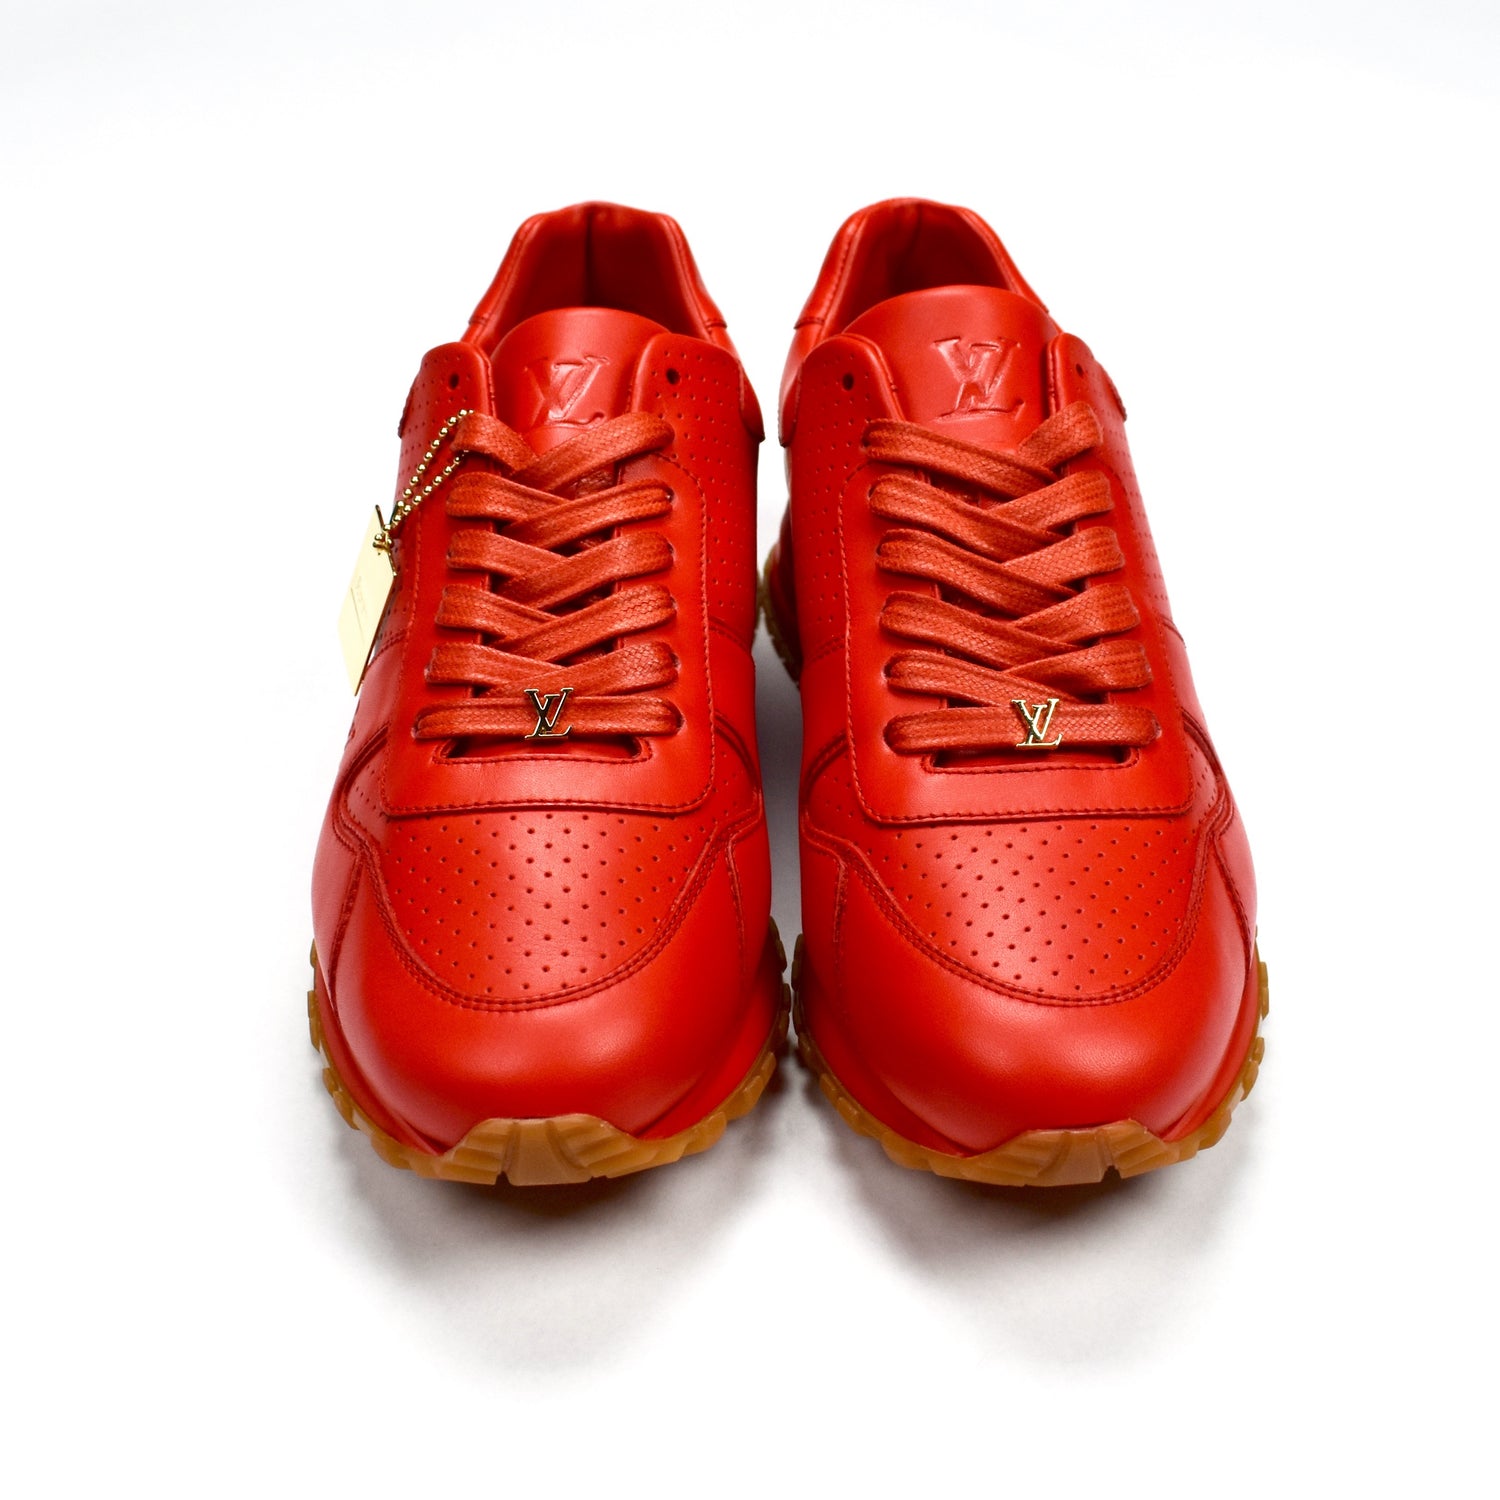 Louis Vuitton X Supreme Run Away Sneaker  Size 10 Available For Immediate  Sale At Sotheby's